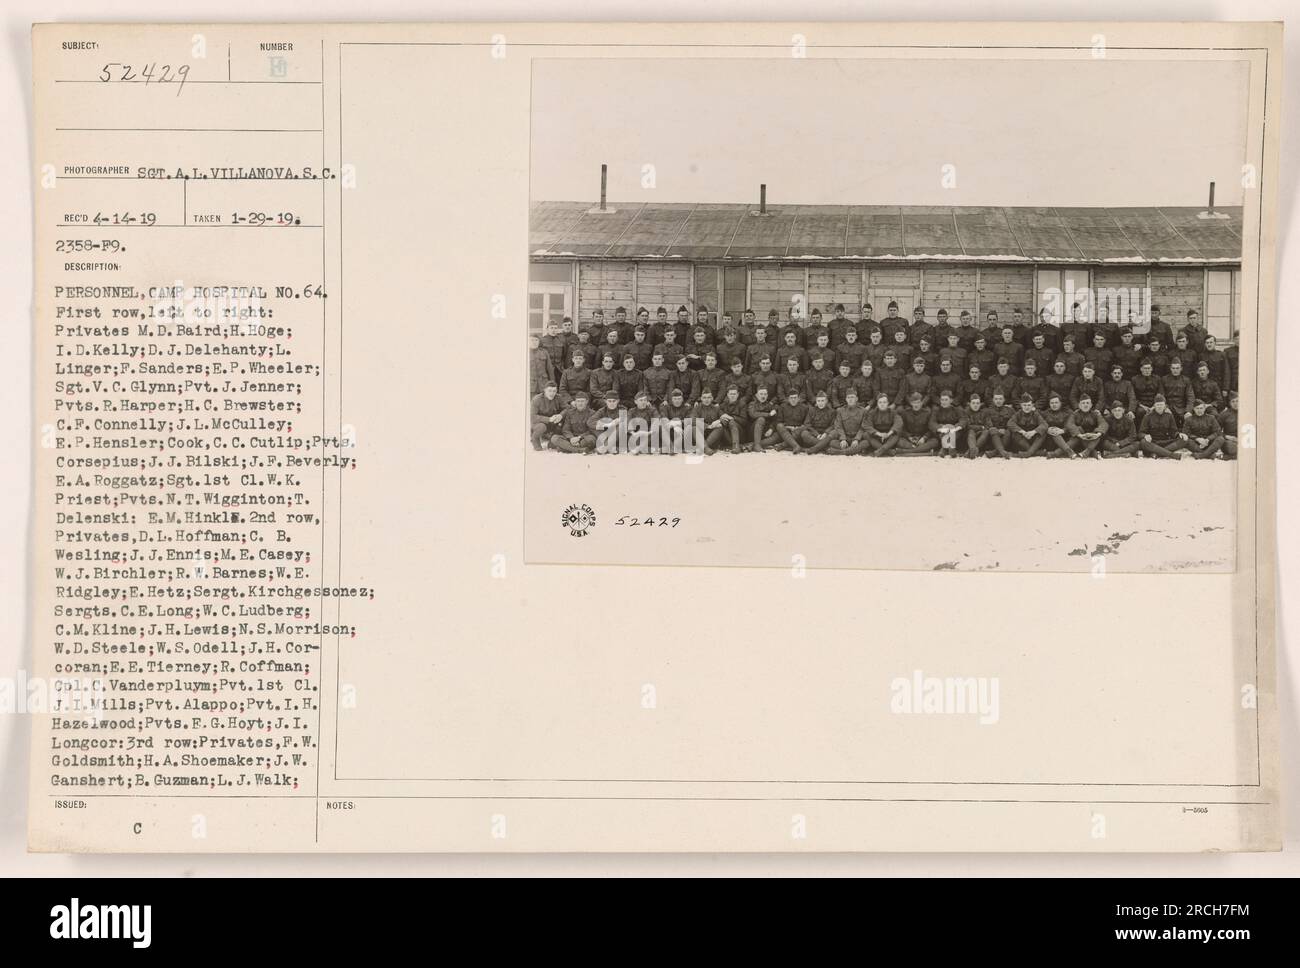 Personnel of Camp Hospital No. 64 in Chatillon sur Seine, Cote d'Or, France. The photograph was taken by Sgt. A.L. Villanova on January 29, 1919. The first row includes Privates M.D. Baird, H. Hoge, I.D. Kelly, D.J. Delehanty, L. Linger, F. Sanders, E.P. Wheeler, Sgt. V.C. Glynn, Pvt. J. Jenner, Pvts. R. Harper, H.C. Brewster, C.F. Connelly, J.L. McCulley, E.P. Hensler, Cook C.C. Cutlip, and more. The second row consists of Privates D.L. Hoffman, C.B. Wesling, J.J. Ennis, M.E. Casey, W.J. Birchler, R.W. Barnes, W.E. Ridgley, E. Hetz, and more. The third row features Privates F.W. Goldsmith, H. Stock Photo